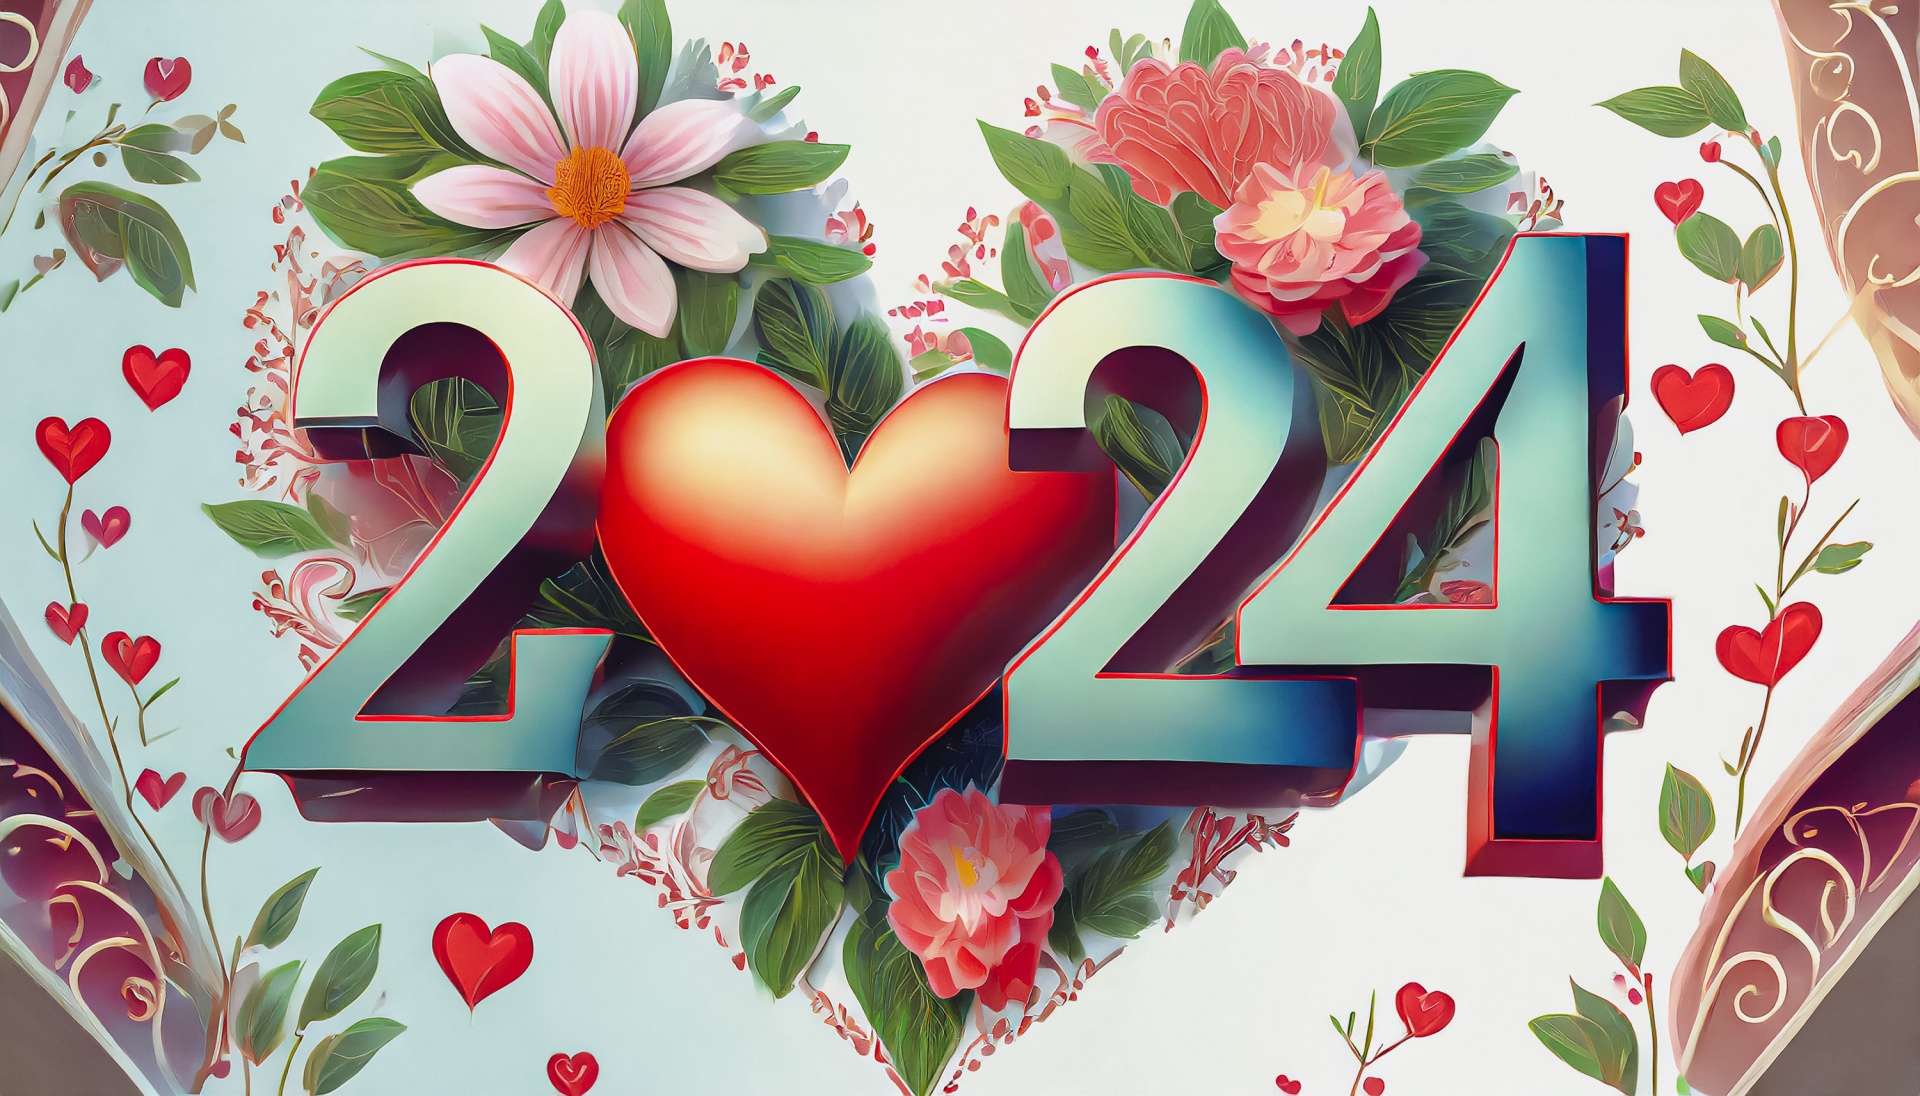 New Year 2024, Greeting Card Free Stock Photo Public Domain Pictures